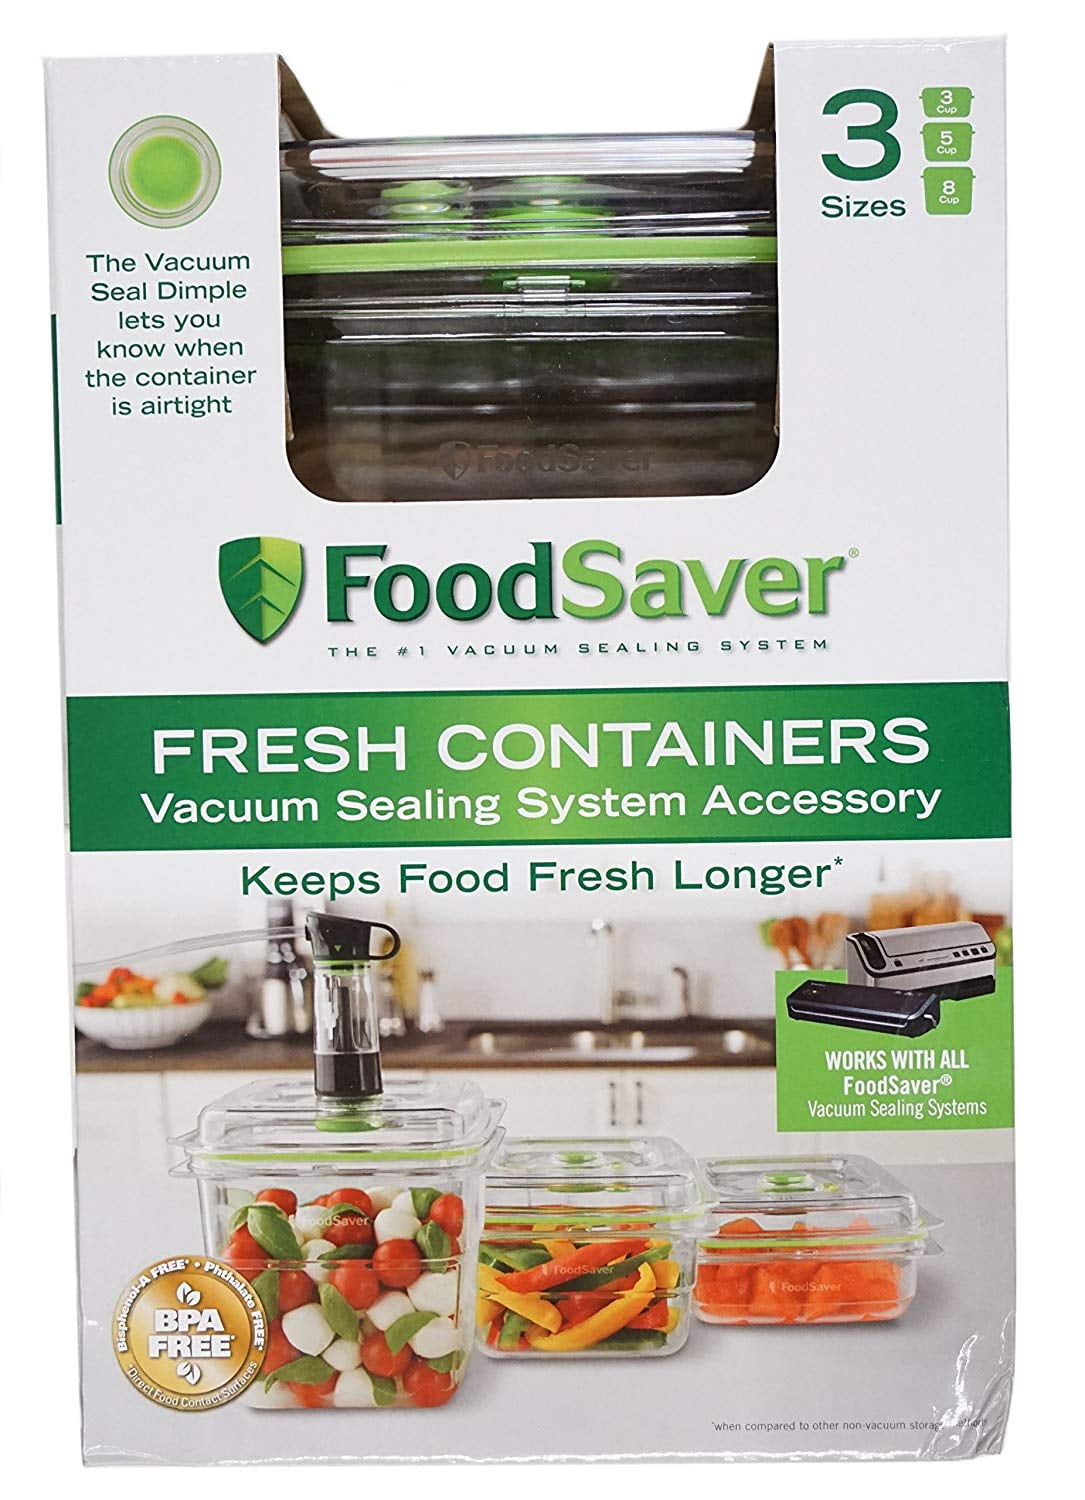 Food Saver Fresh Containers Vacuum Sealing System for Safety Foods 3 Sizes 3 CT 